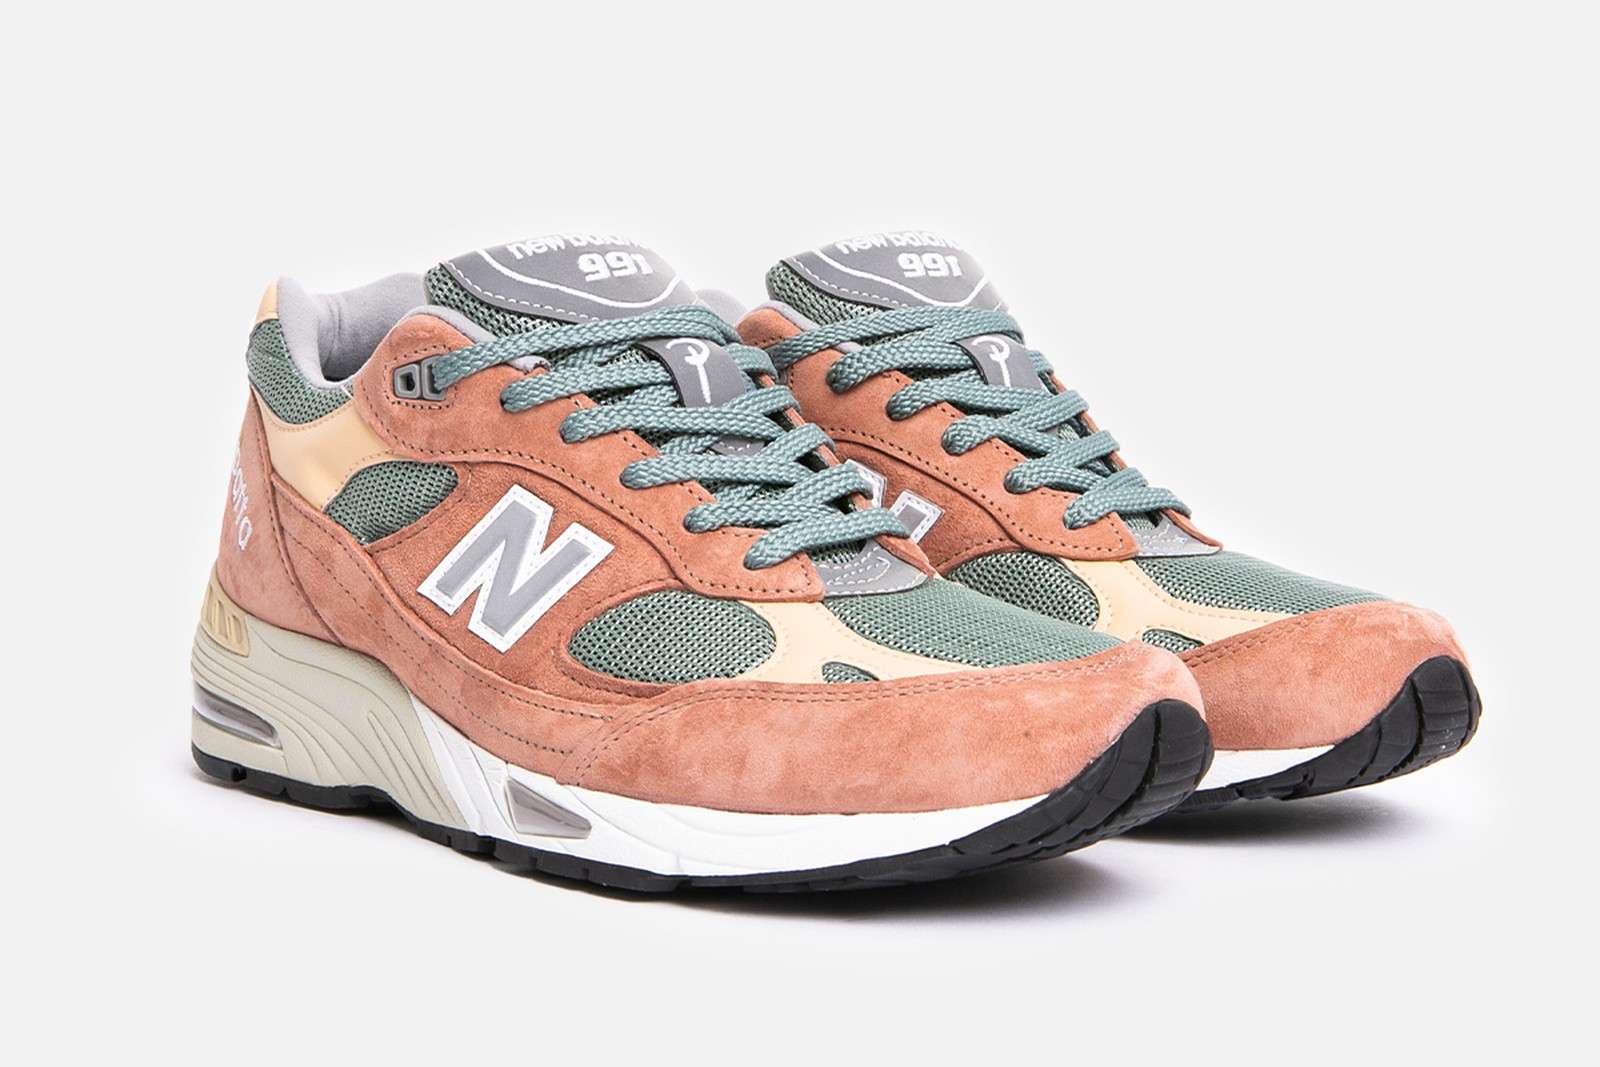 New Balance 991 x Patta - Made for the W